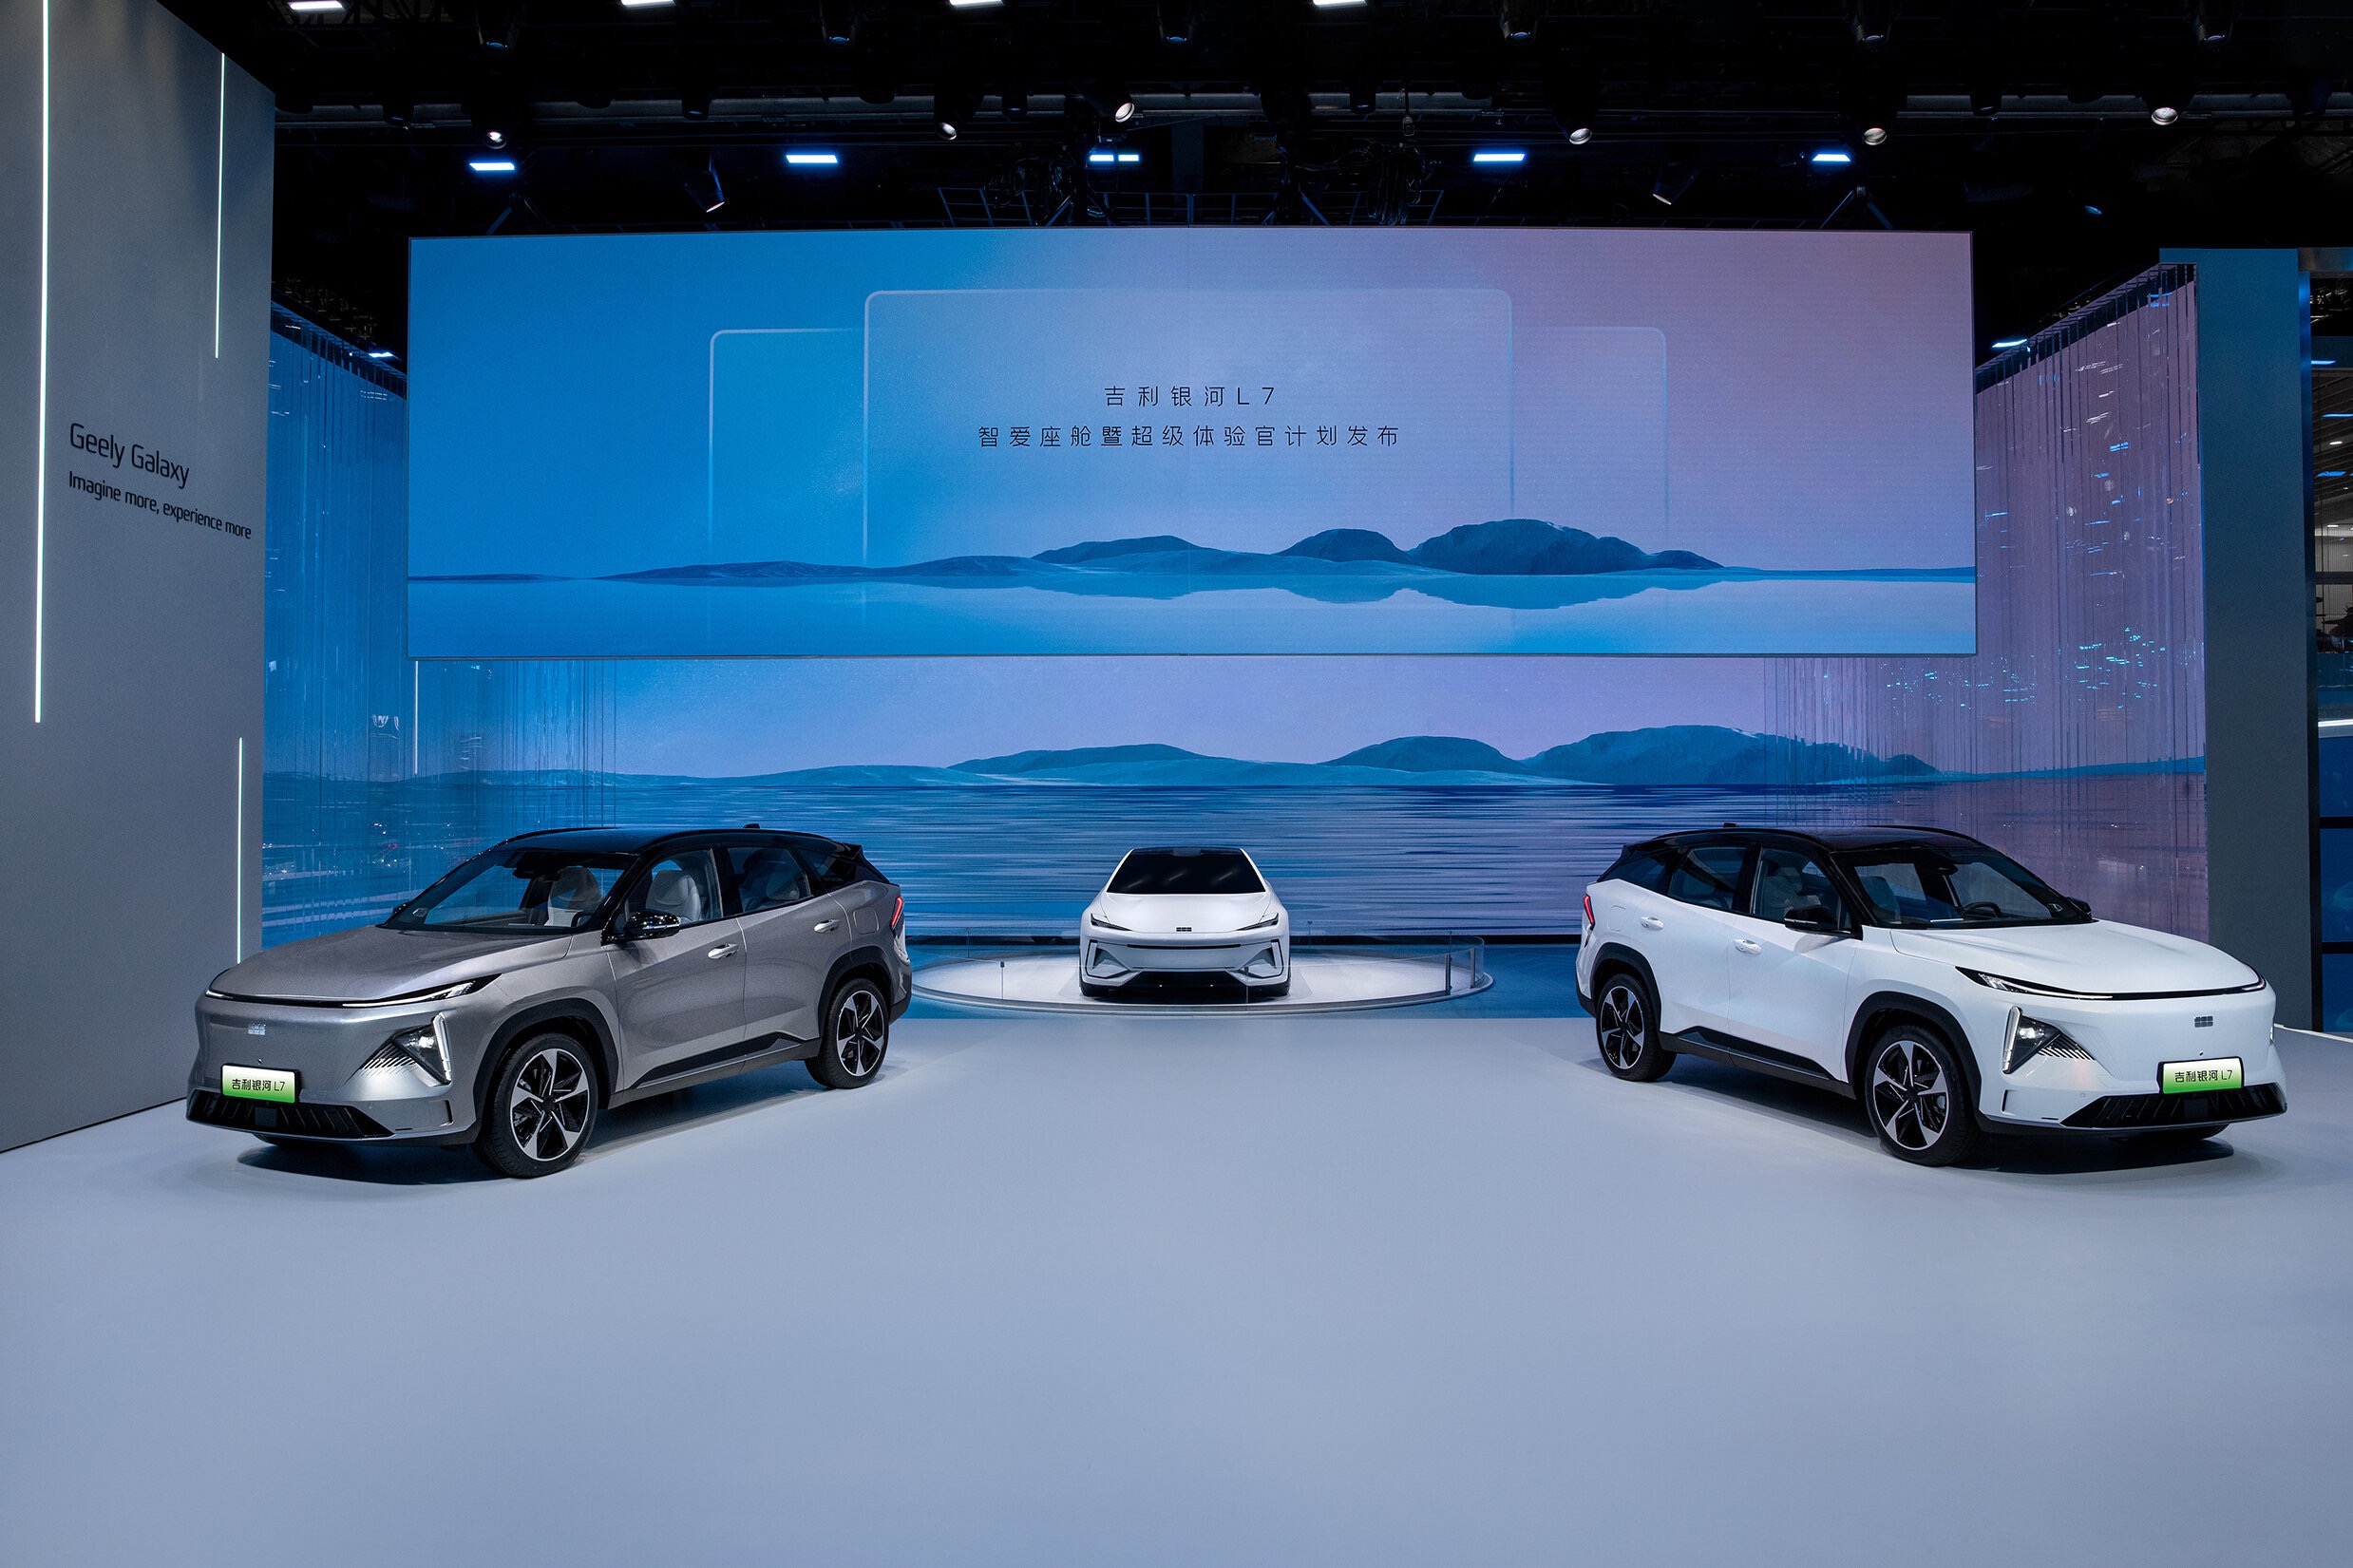 Geely Group's Yinhe L7 SUVs are displayed at the company booth at Auto Shanghai. /Geely Group